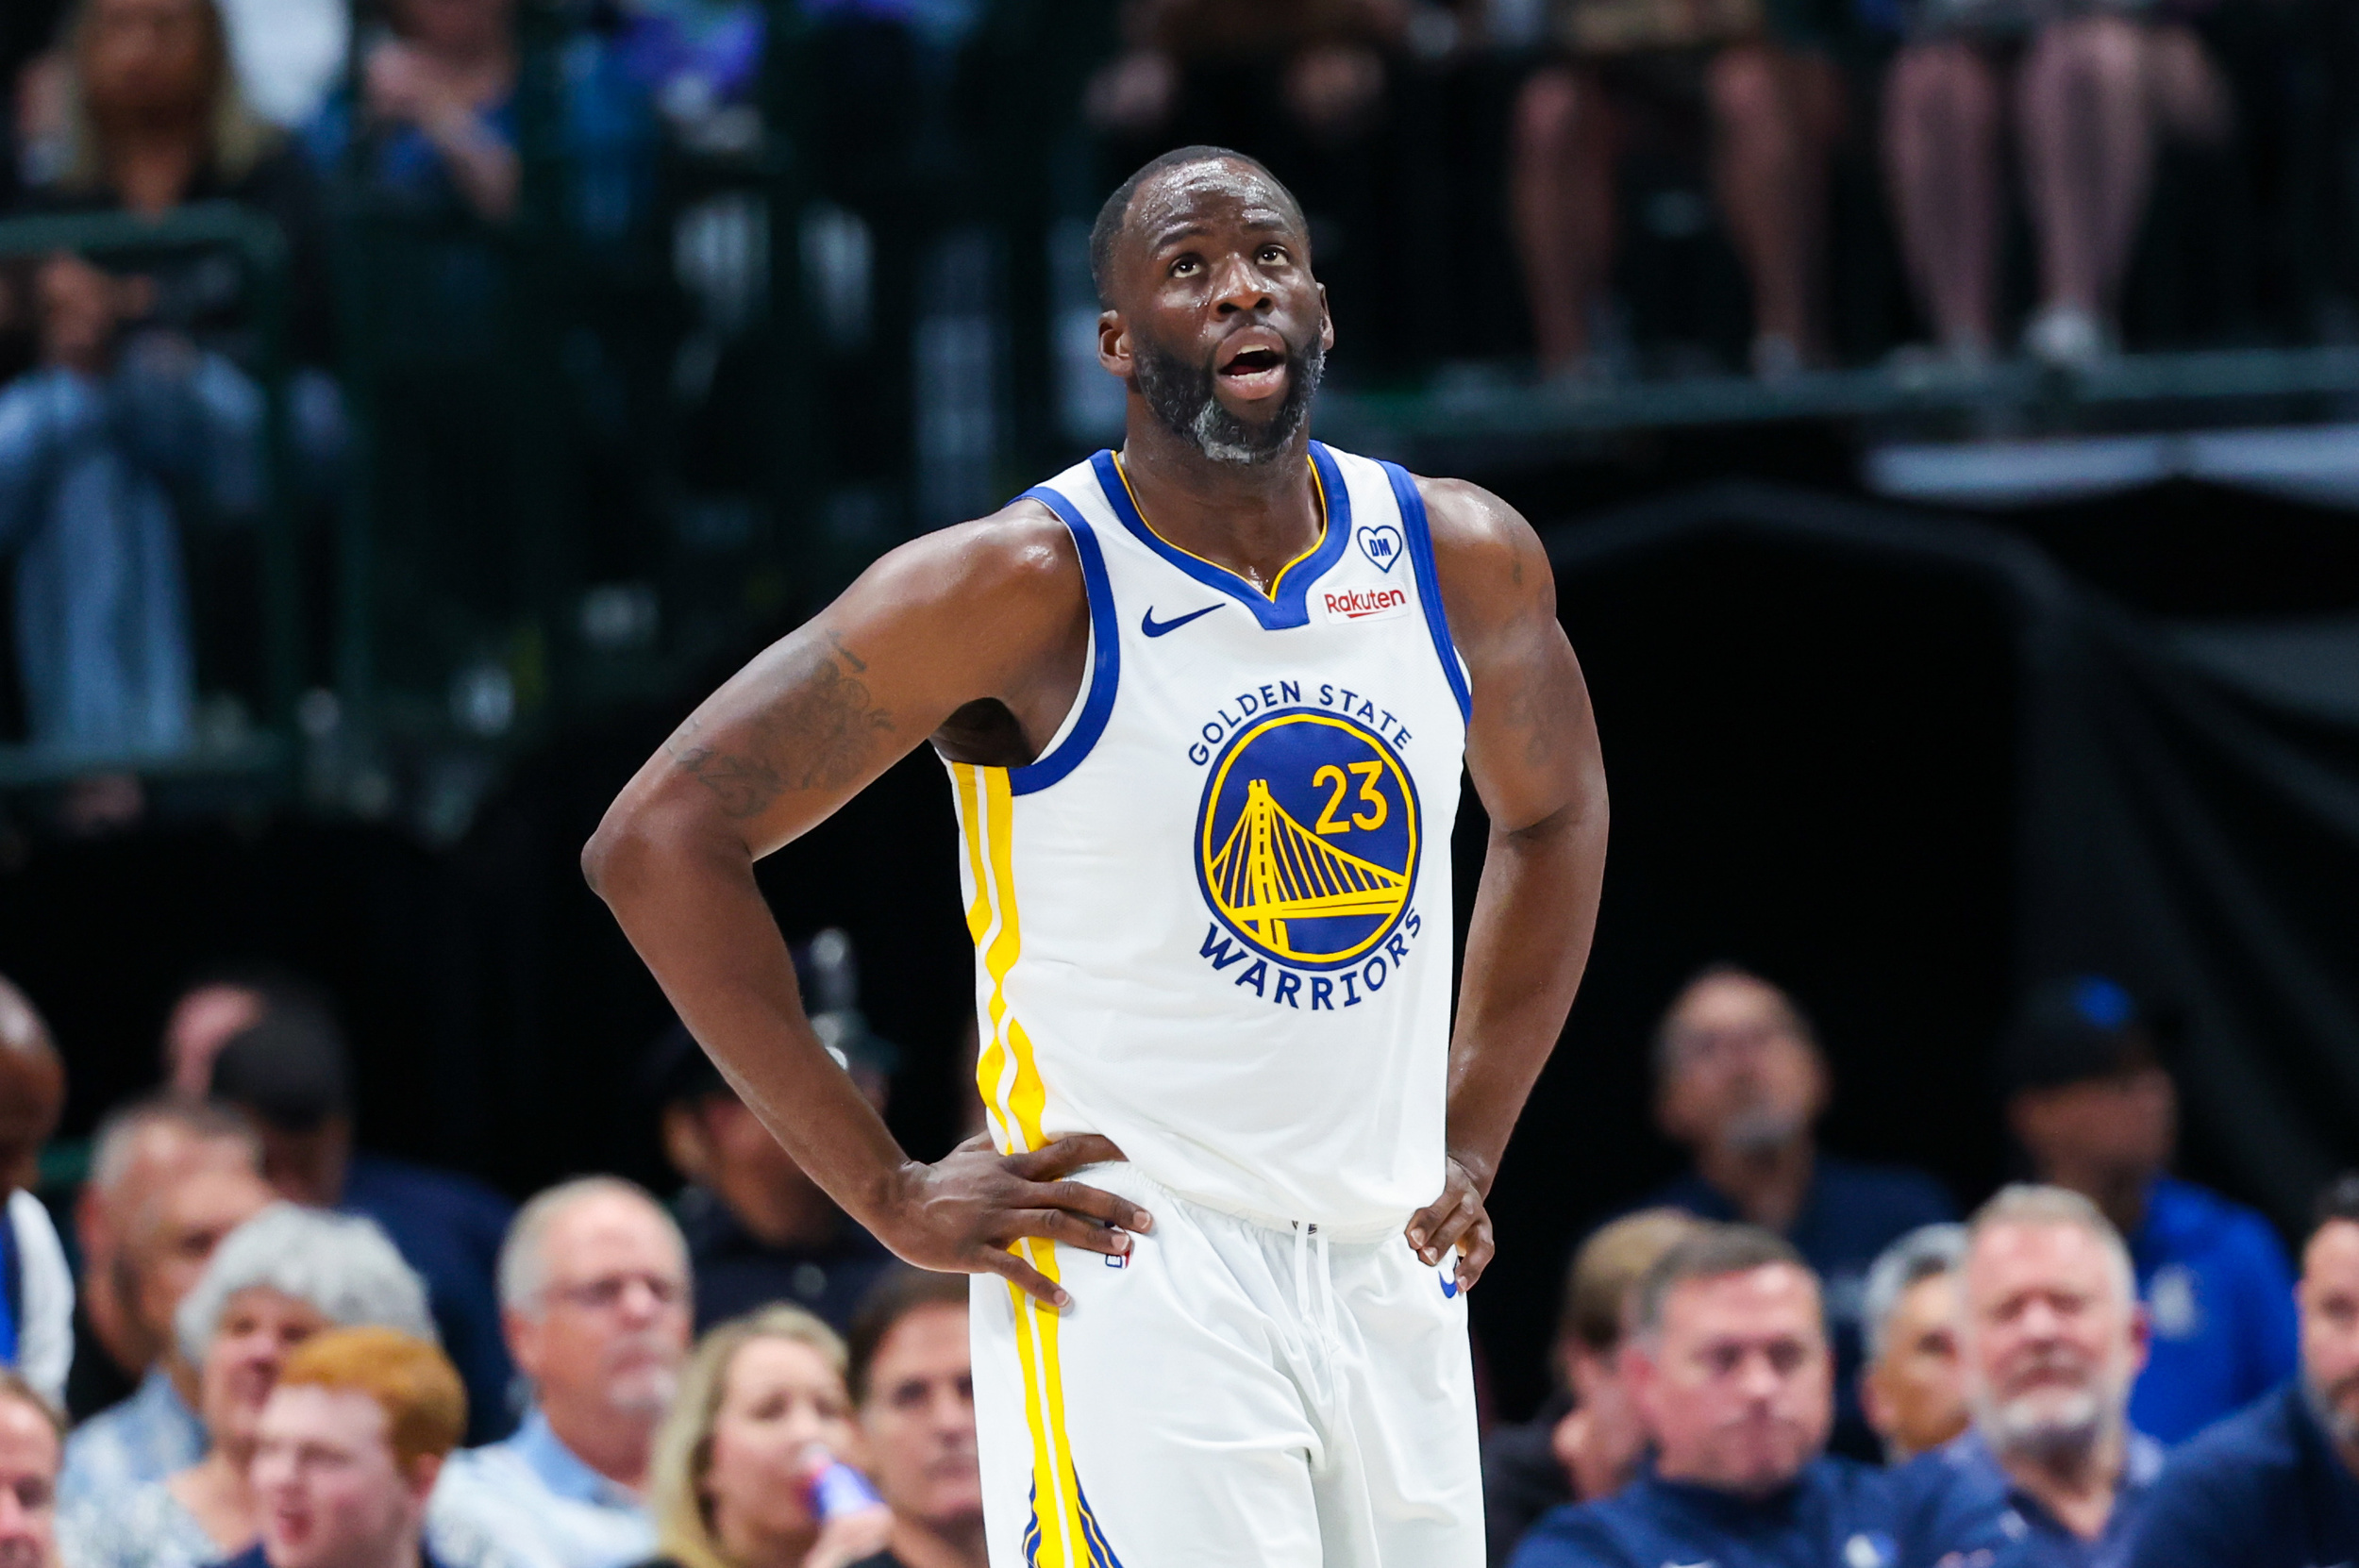 what’s next for the golden state warriors?